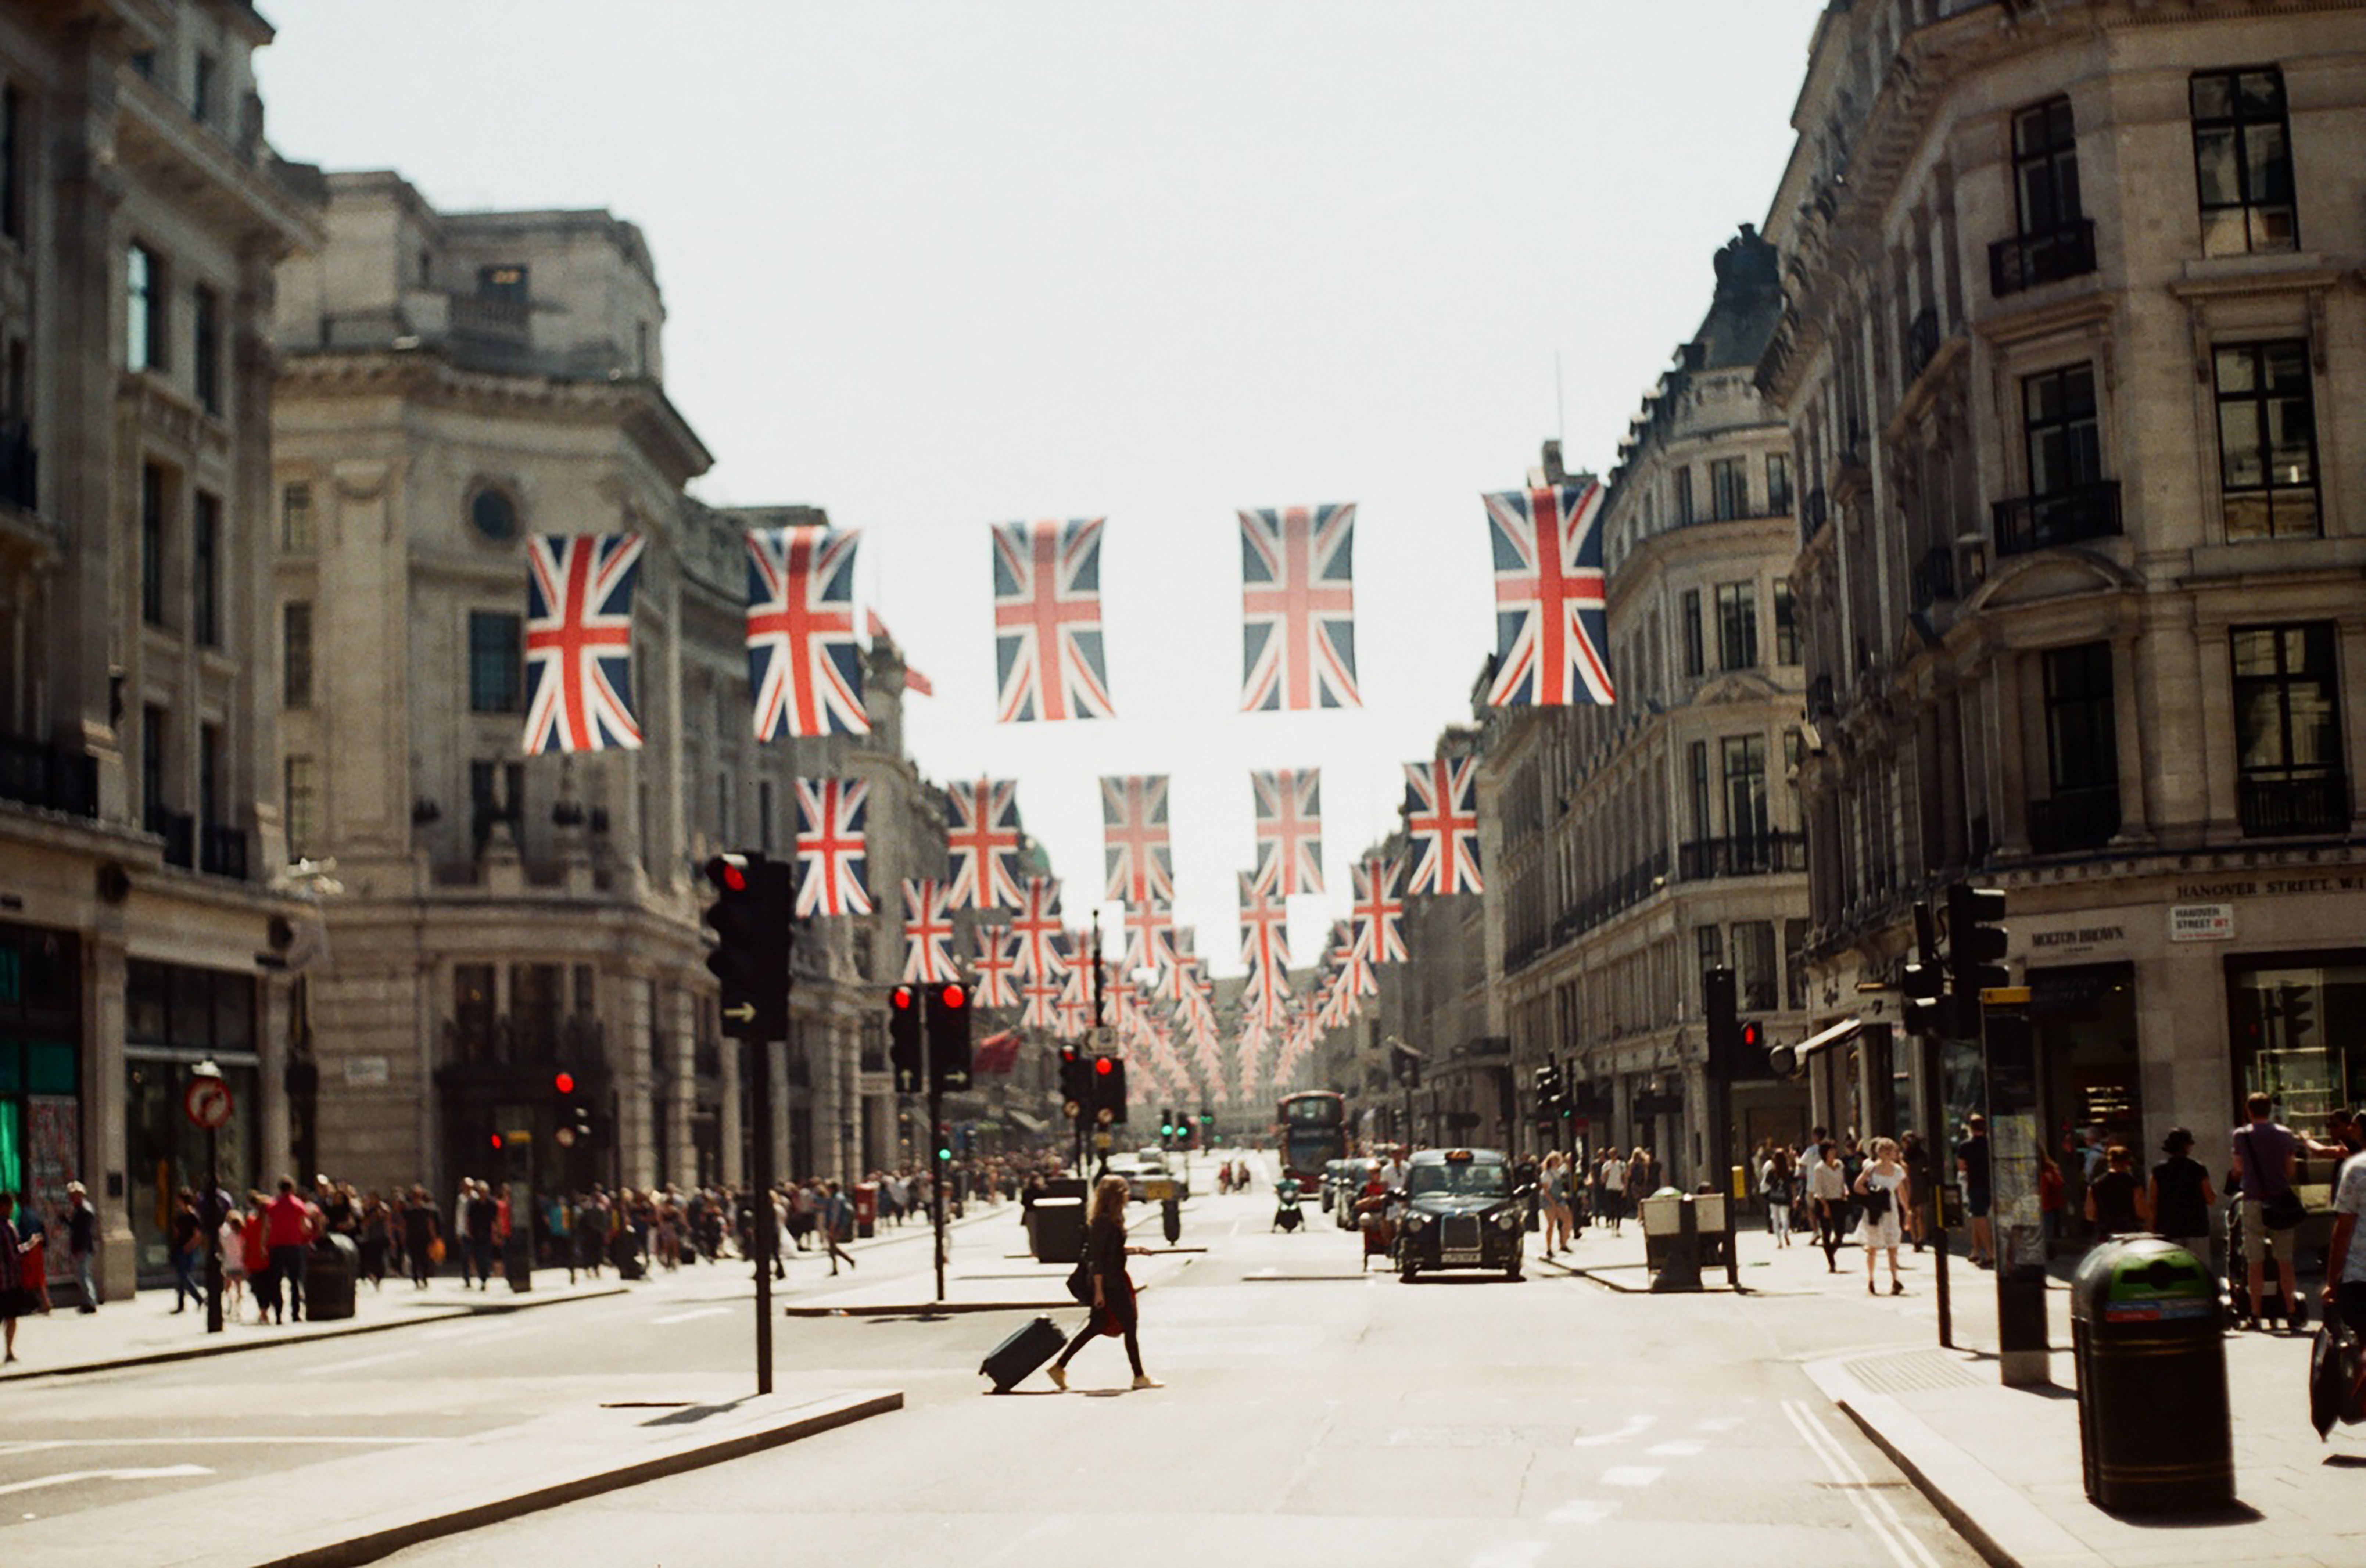 London's Regent Street in summer lined with Union Jack flags